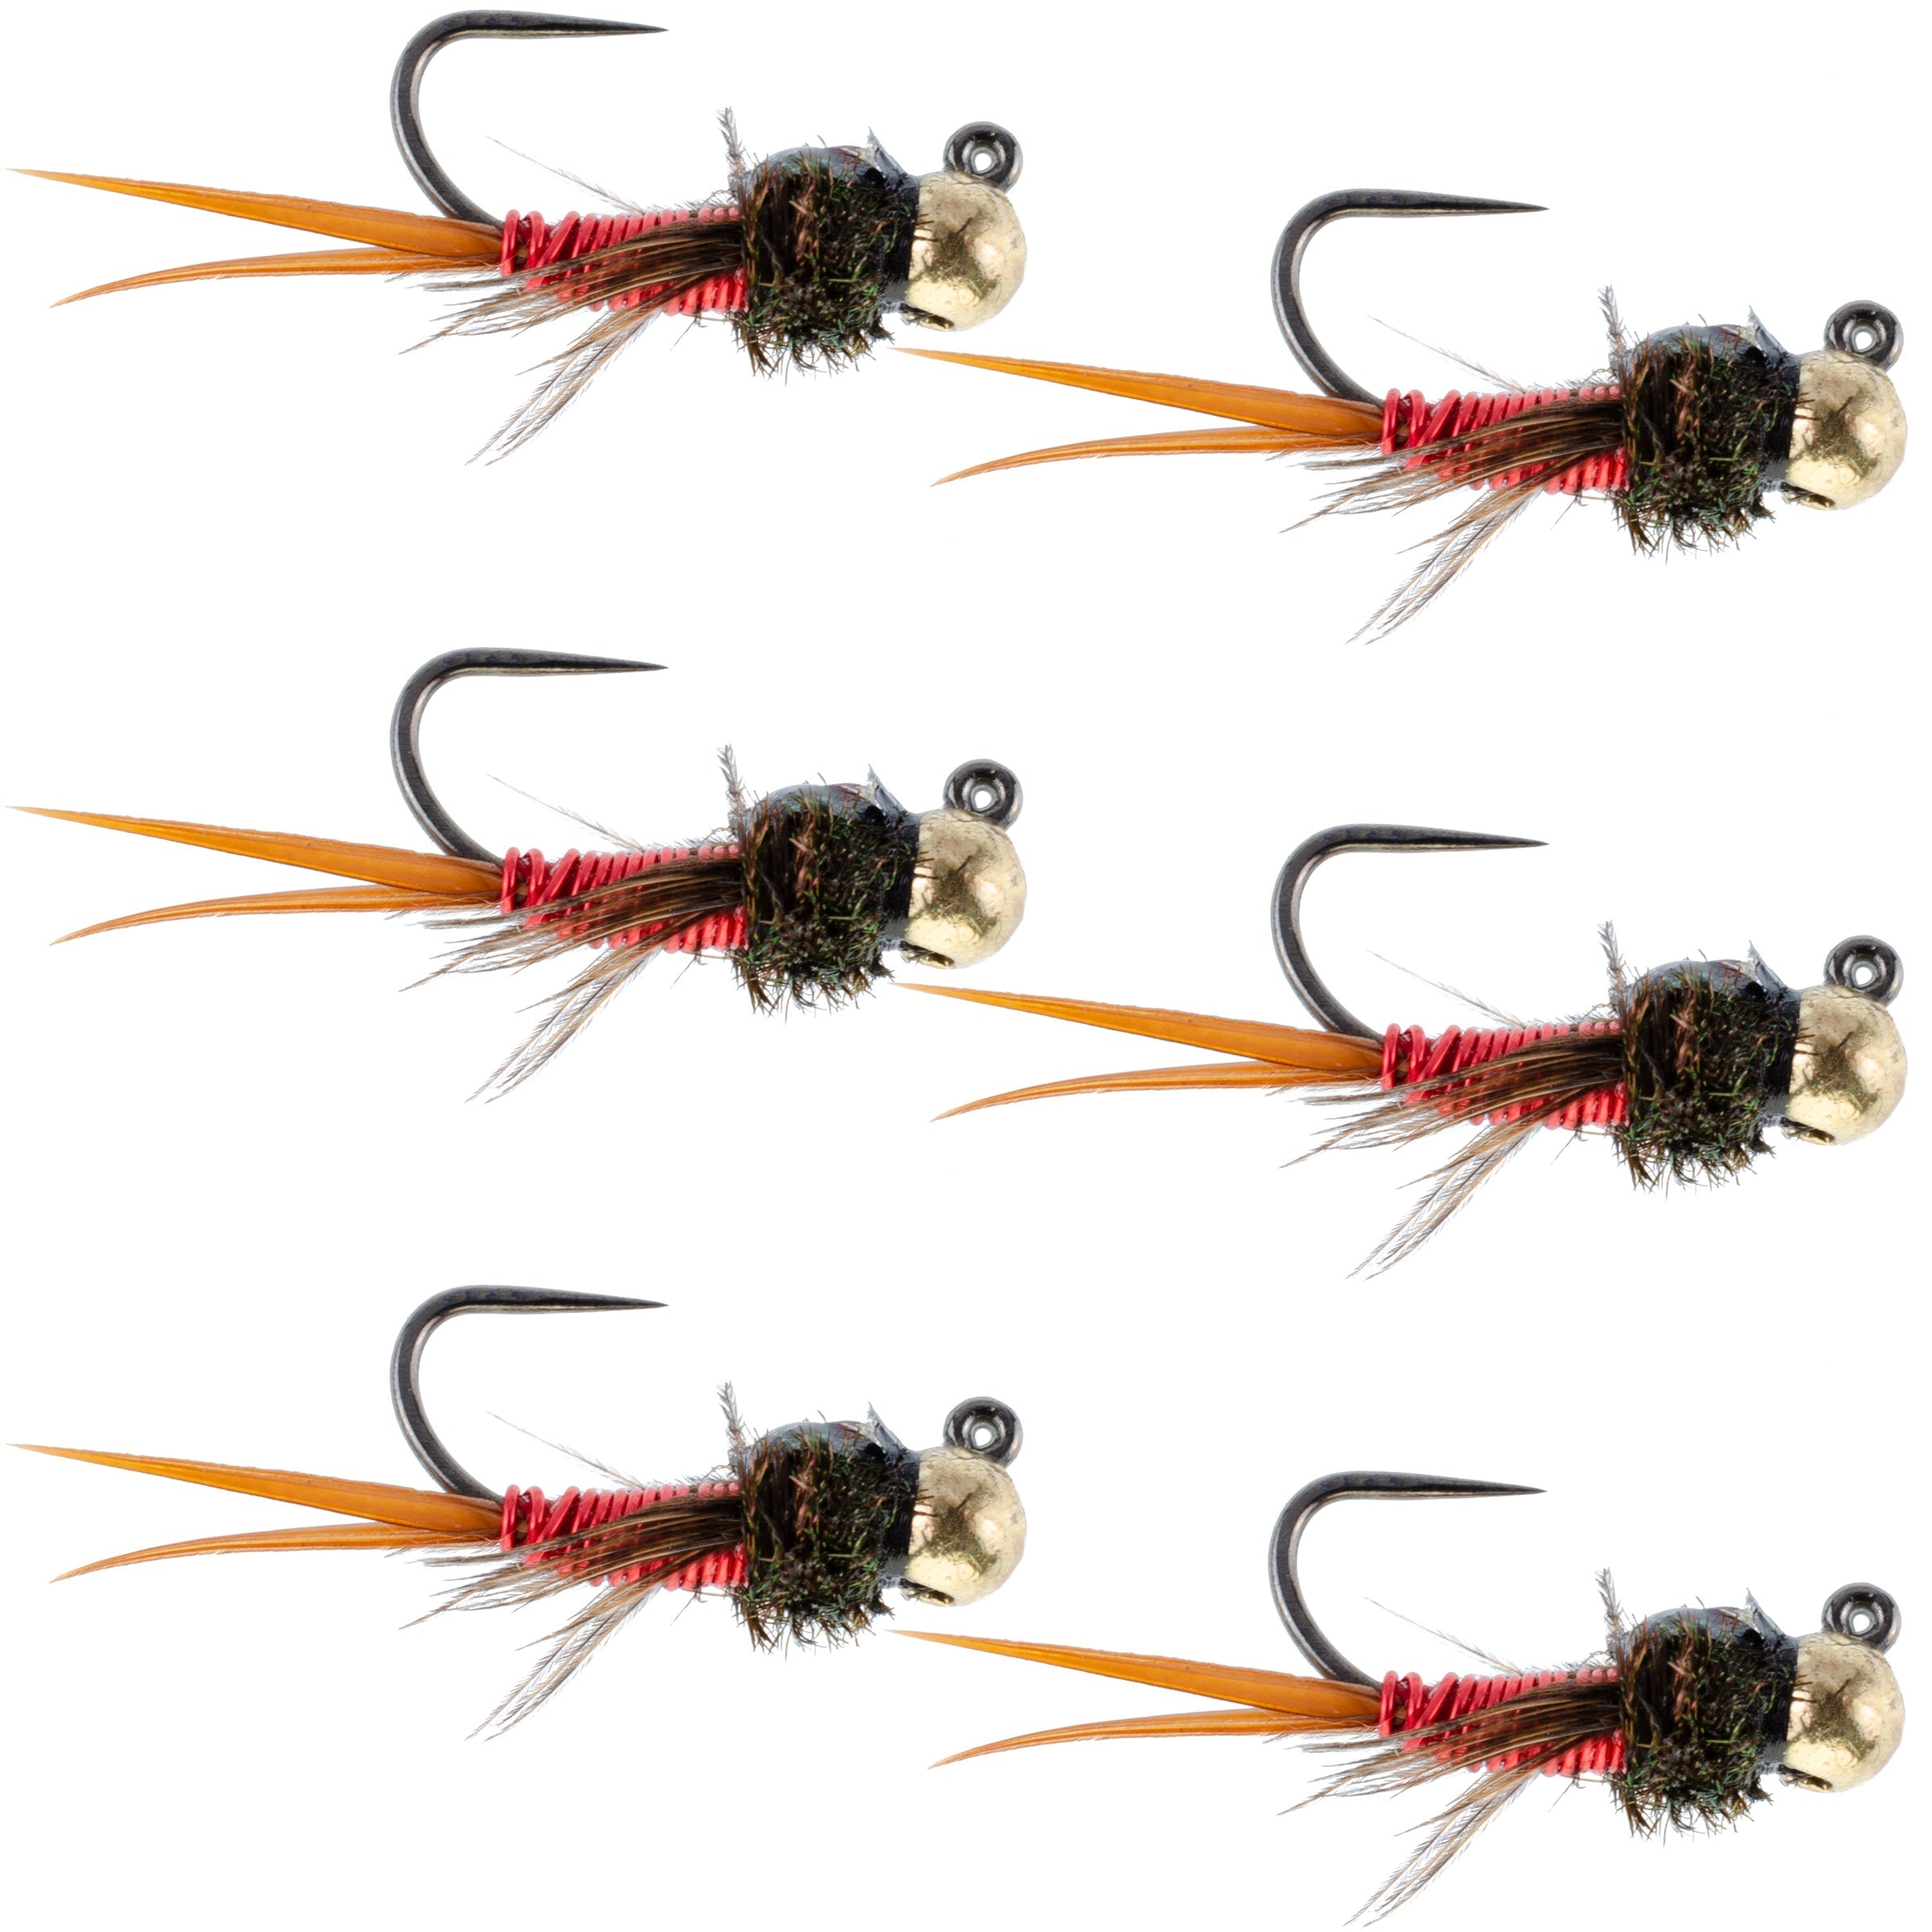 1 DOZEN TUNGSTEN HEAD PINK,BLACK AND PEARL SPANISH NYMPHS FLY FISHING-PER  117